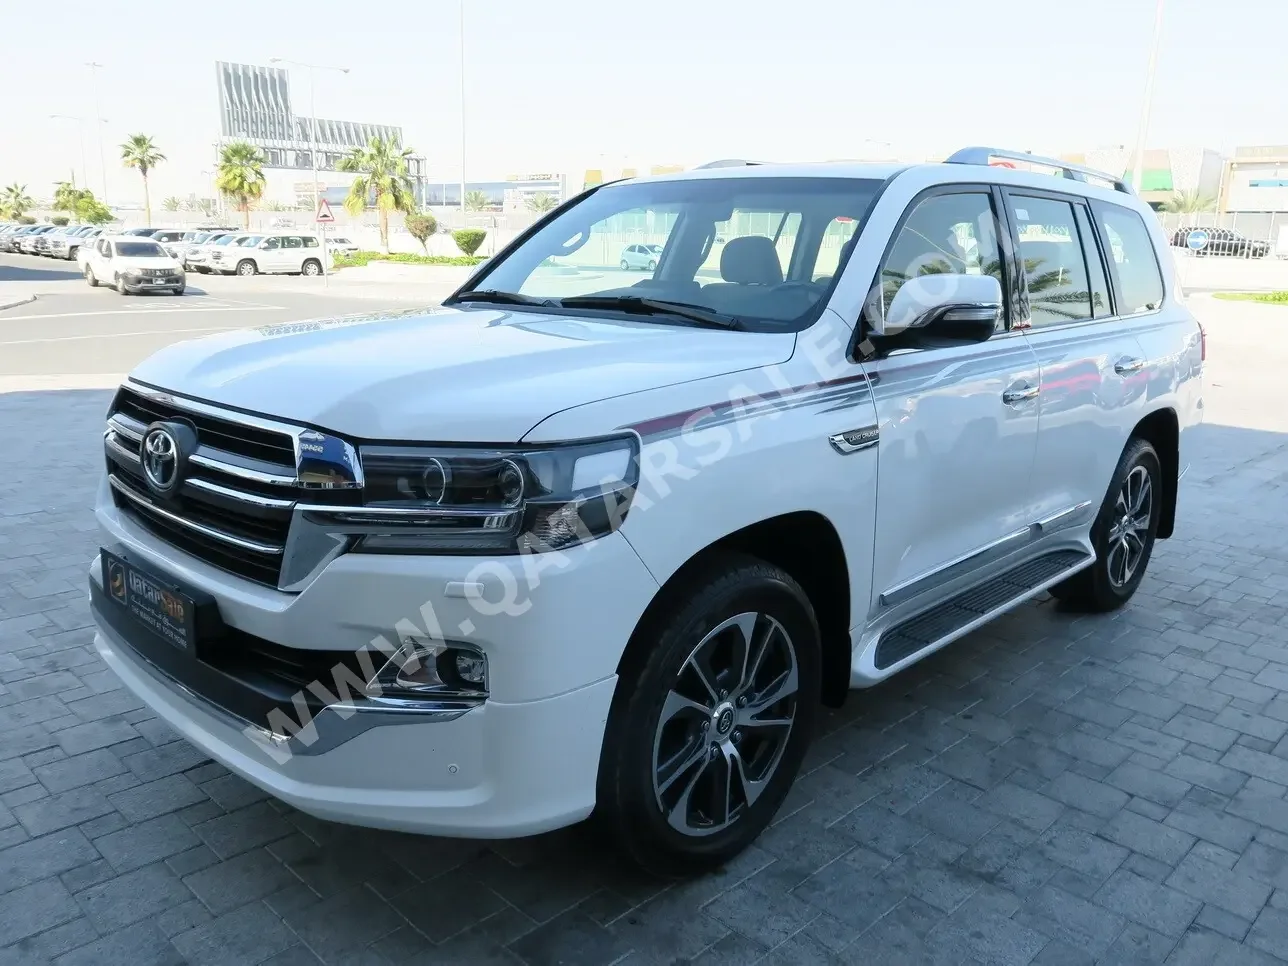 Toyota  Land Cruiser  GXR- Grand Touring  2020  Automatic  88,000 Km  8 Cylinder  Four Wheel Drive (4WD)  SUV  White